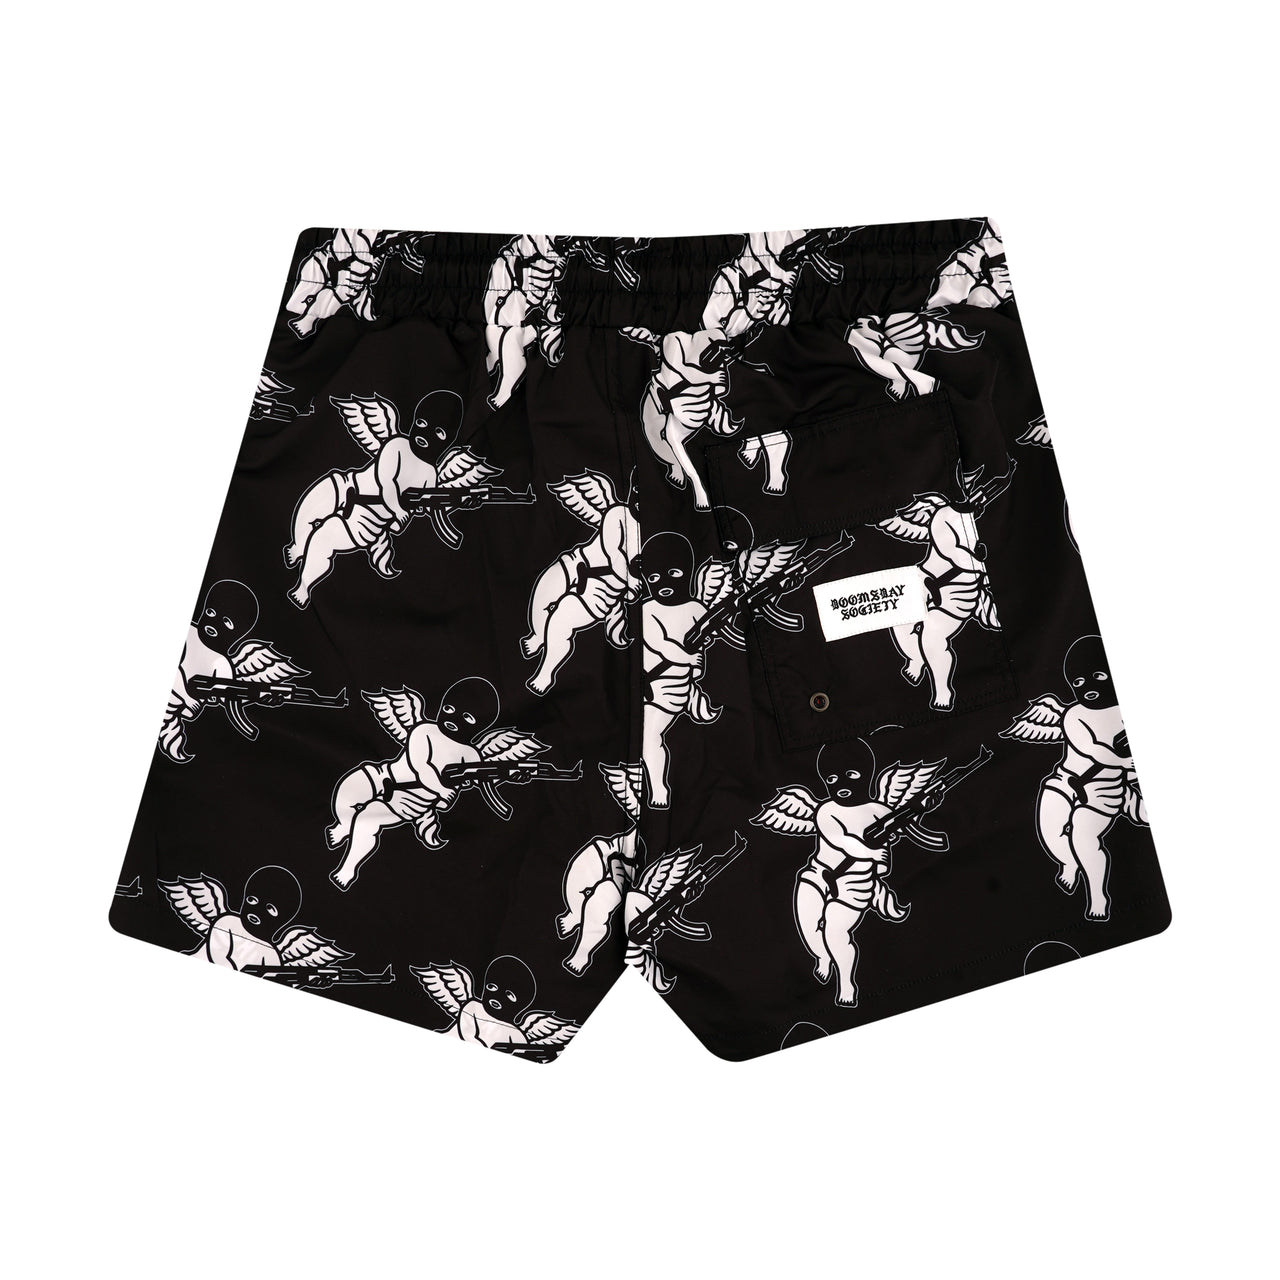 NO MORE SPACE BOARDSHORTS